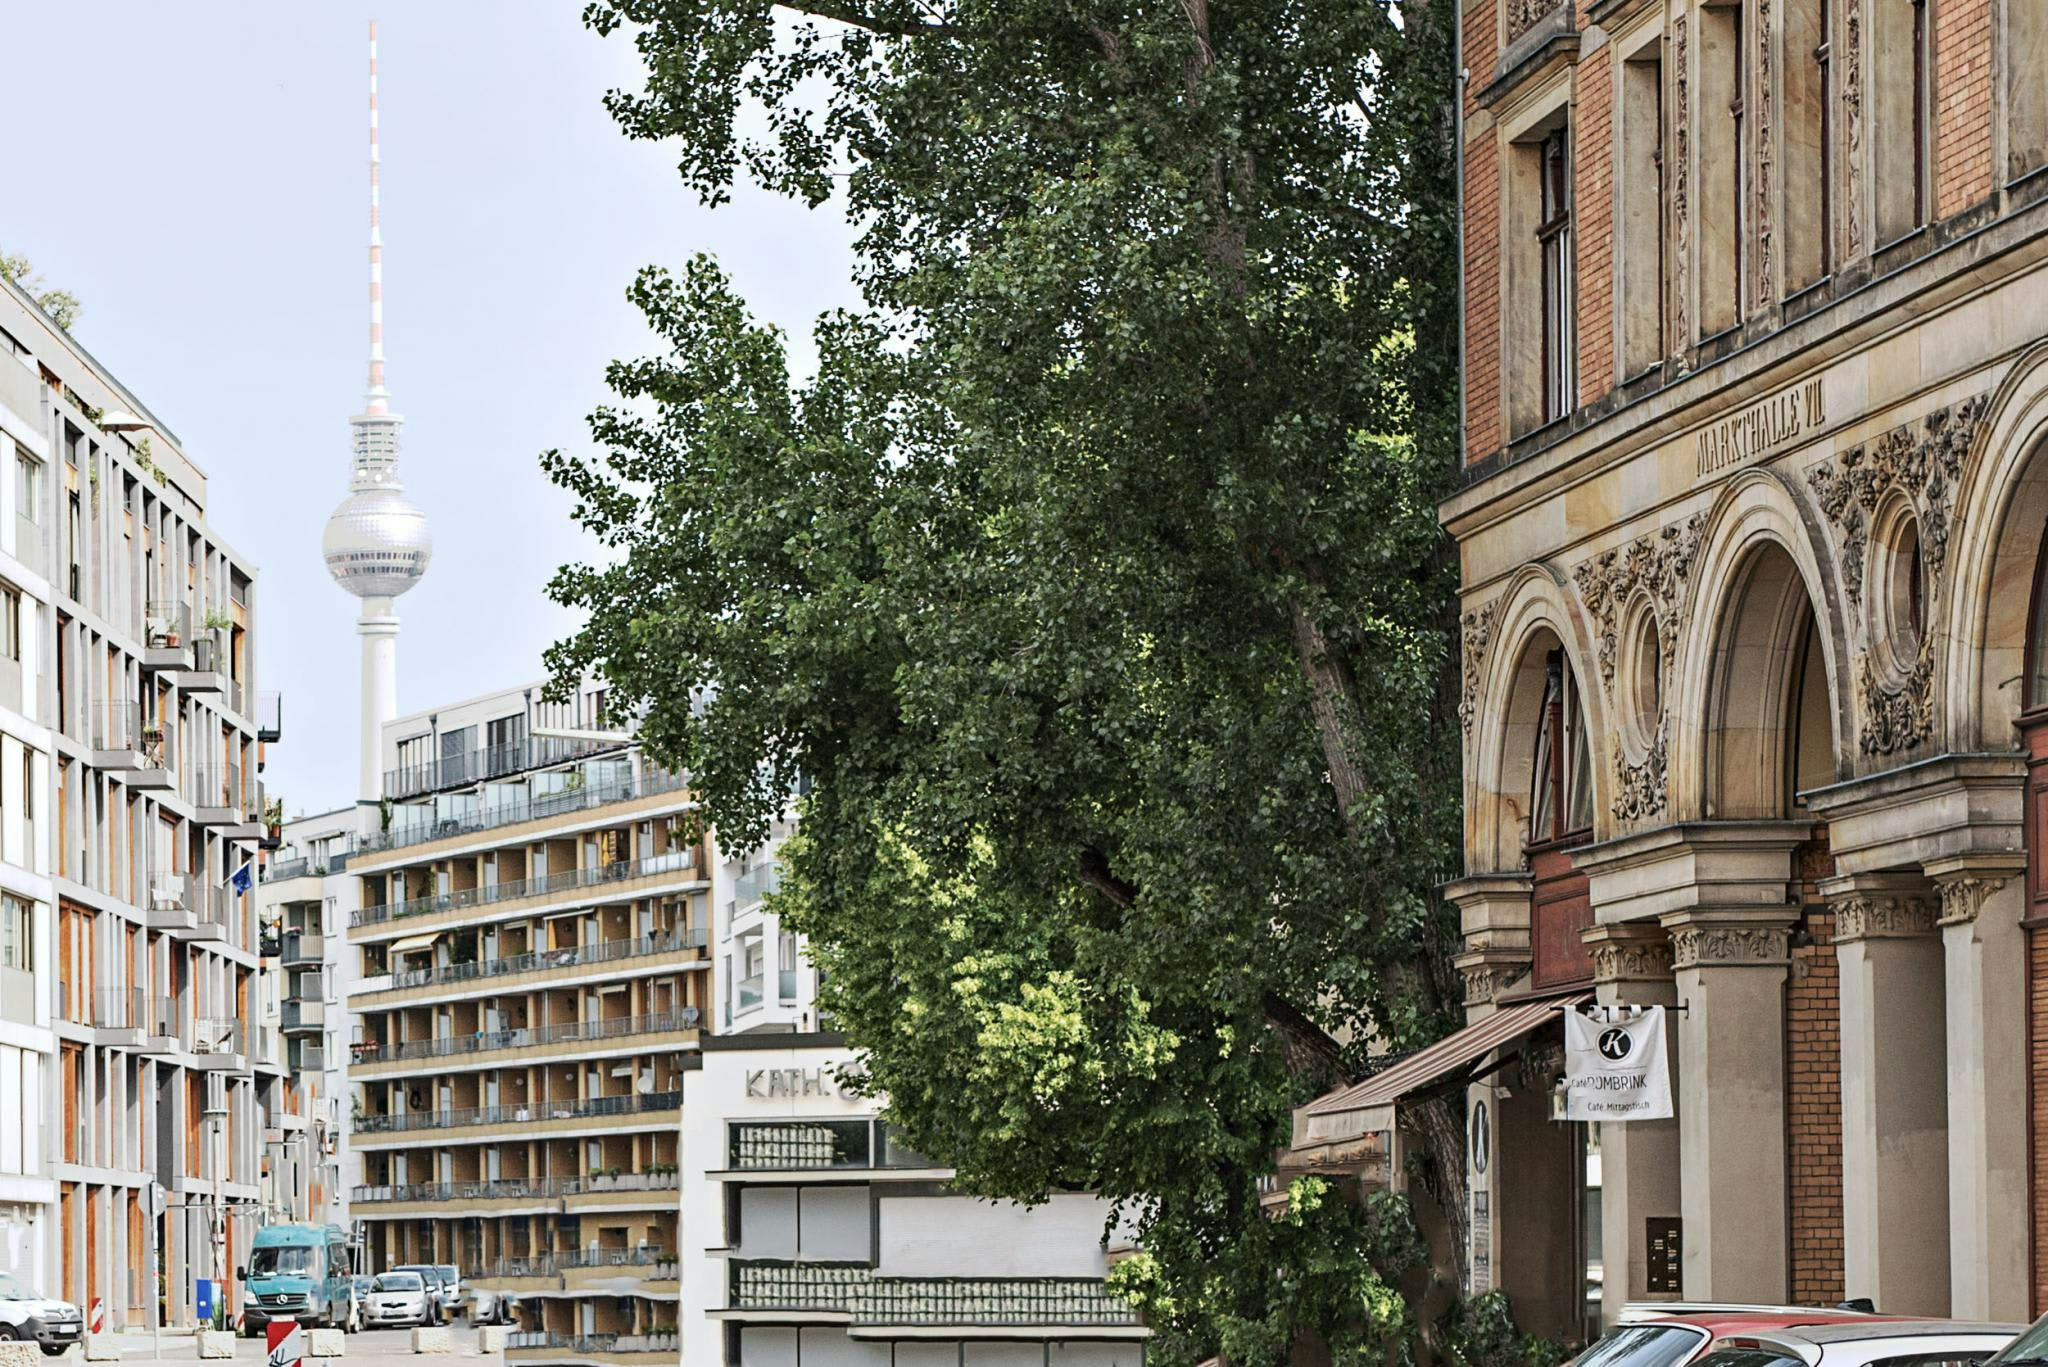 The image features a city street with tall buildings, a large tree, and a large tree in the middle of the street.